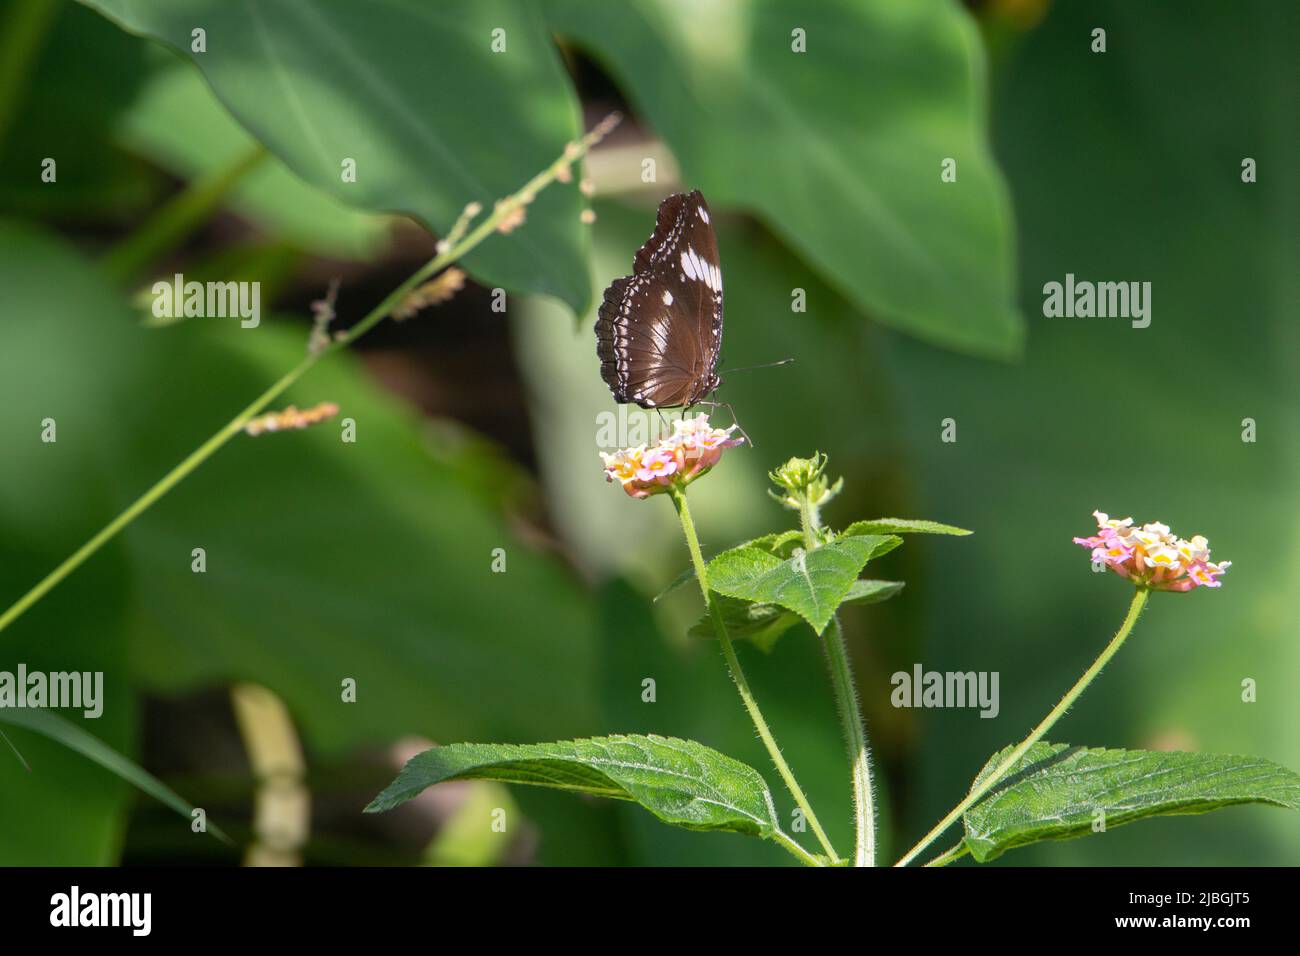 Blue moon butterfly (Hypolimnas bolina) with closed wings feeding from a pink and yellow flower isolated with tropical green leaves in the background Stock Photo